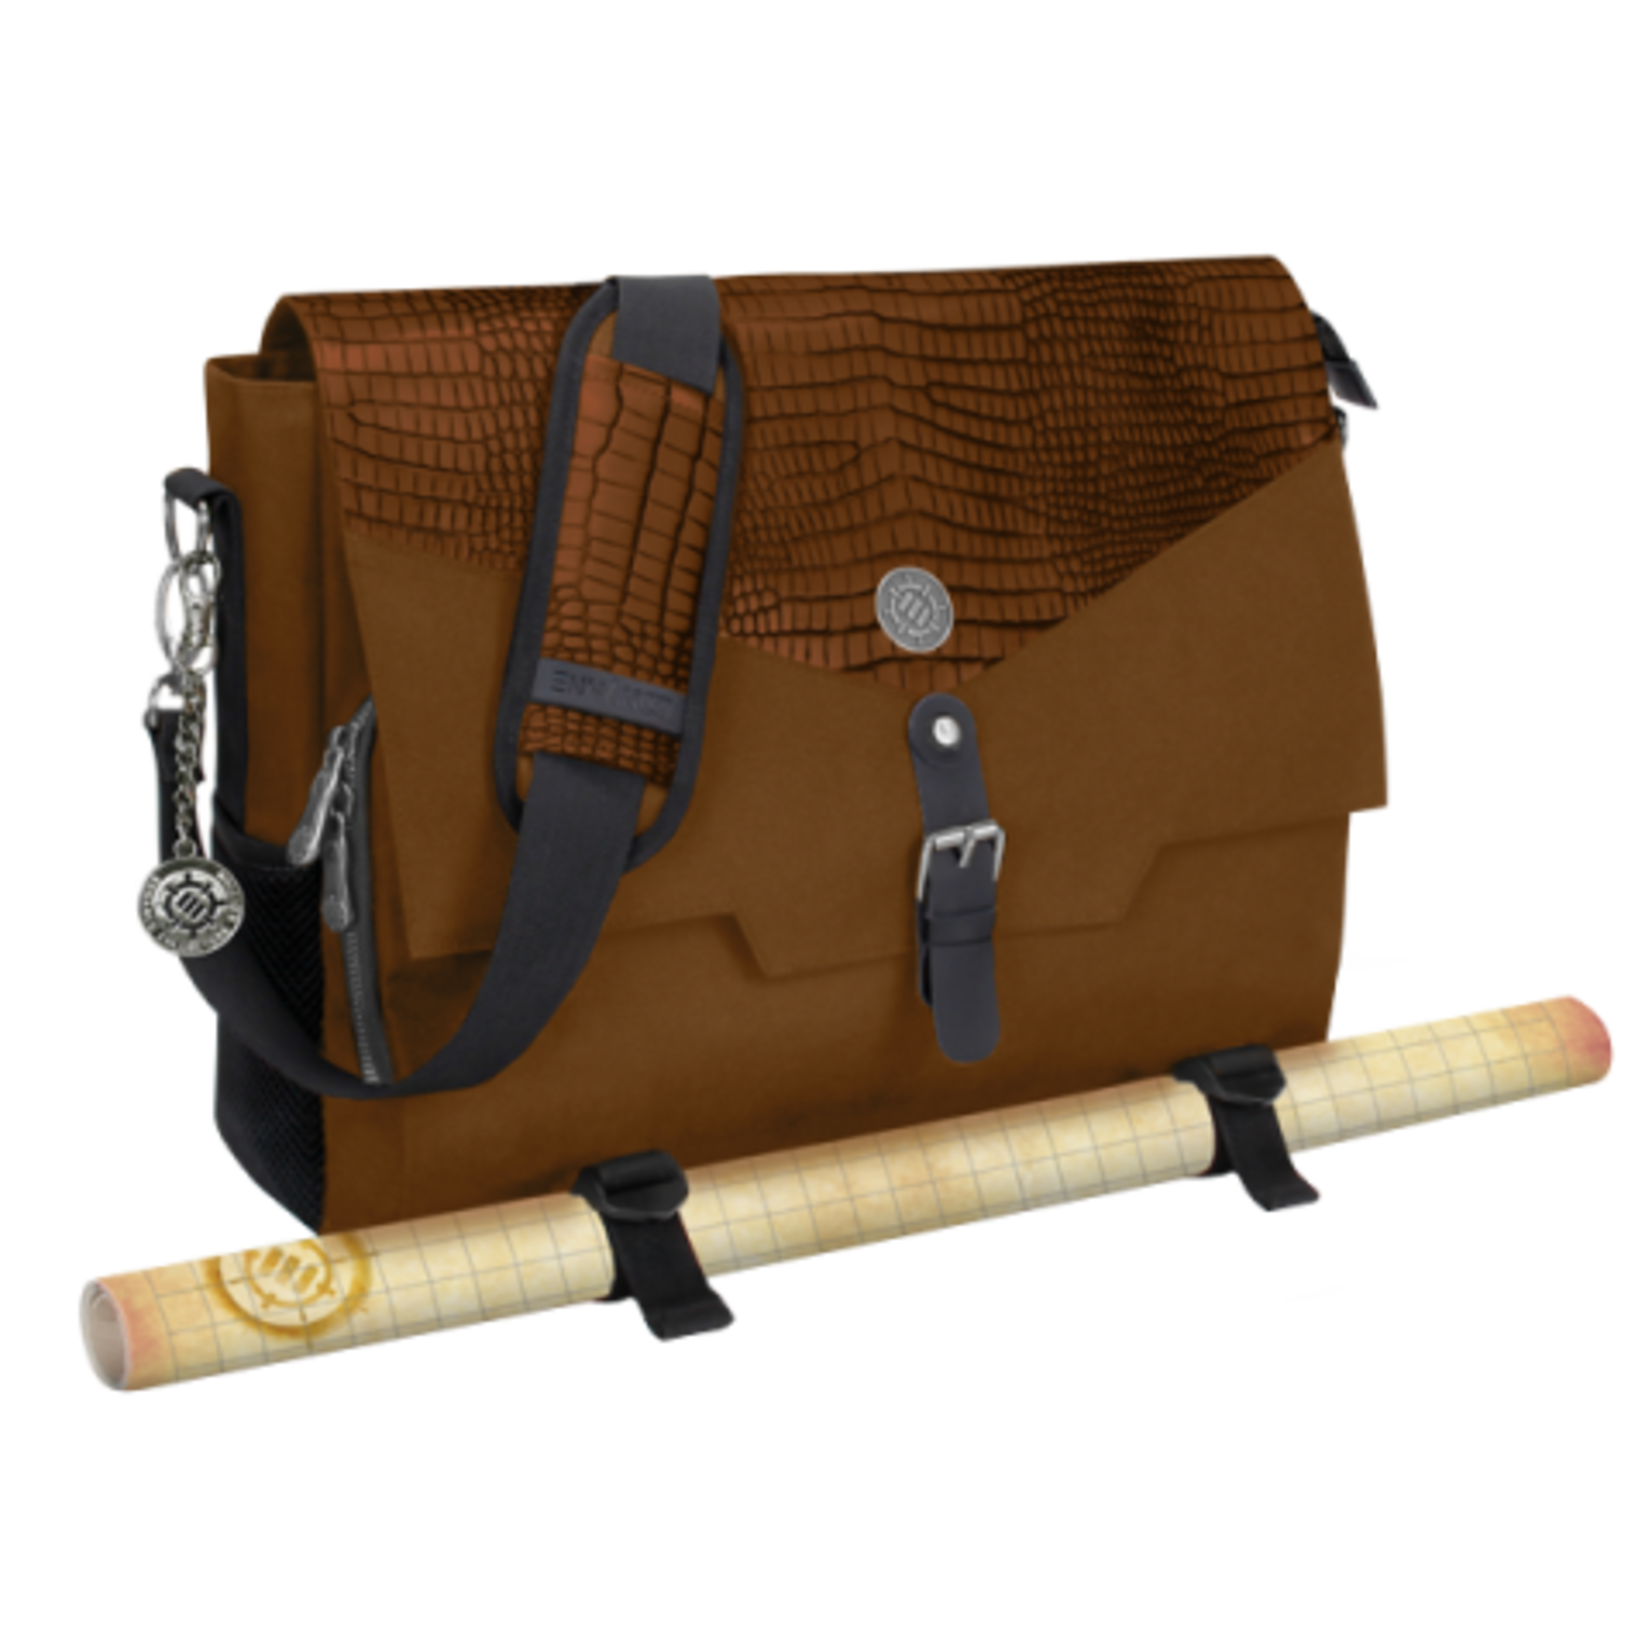 Accessory Power Enhance: RPG Player's Bag Collector's Edition